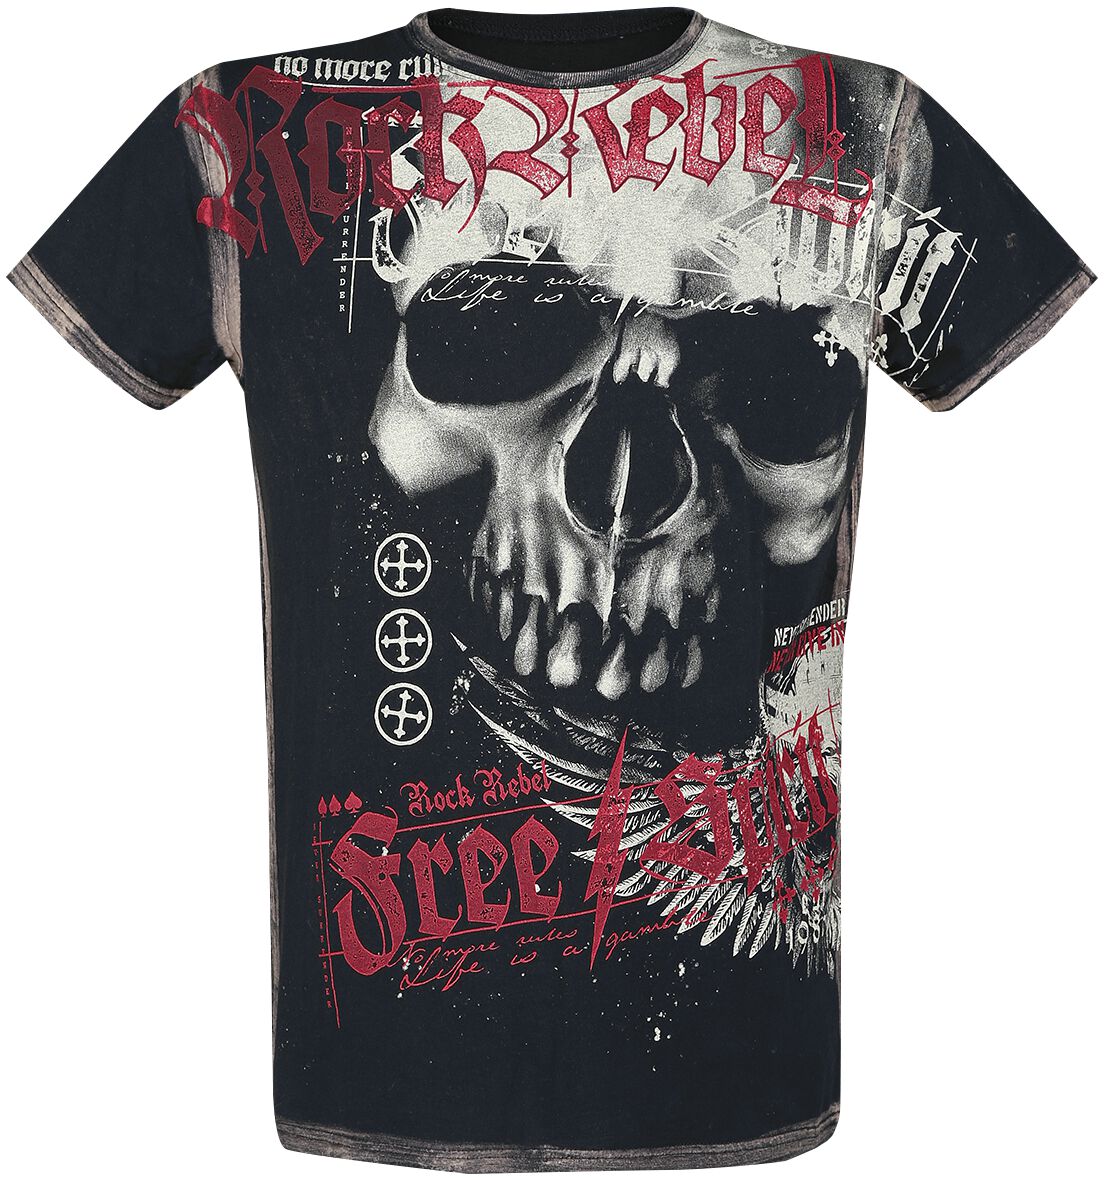 Image of T-Shirt di Rock Rebel by EMP - T-Shirt with Skull Print - M a L - Uomo - nero